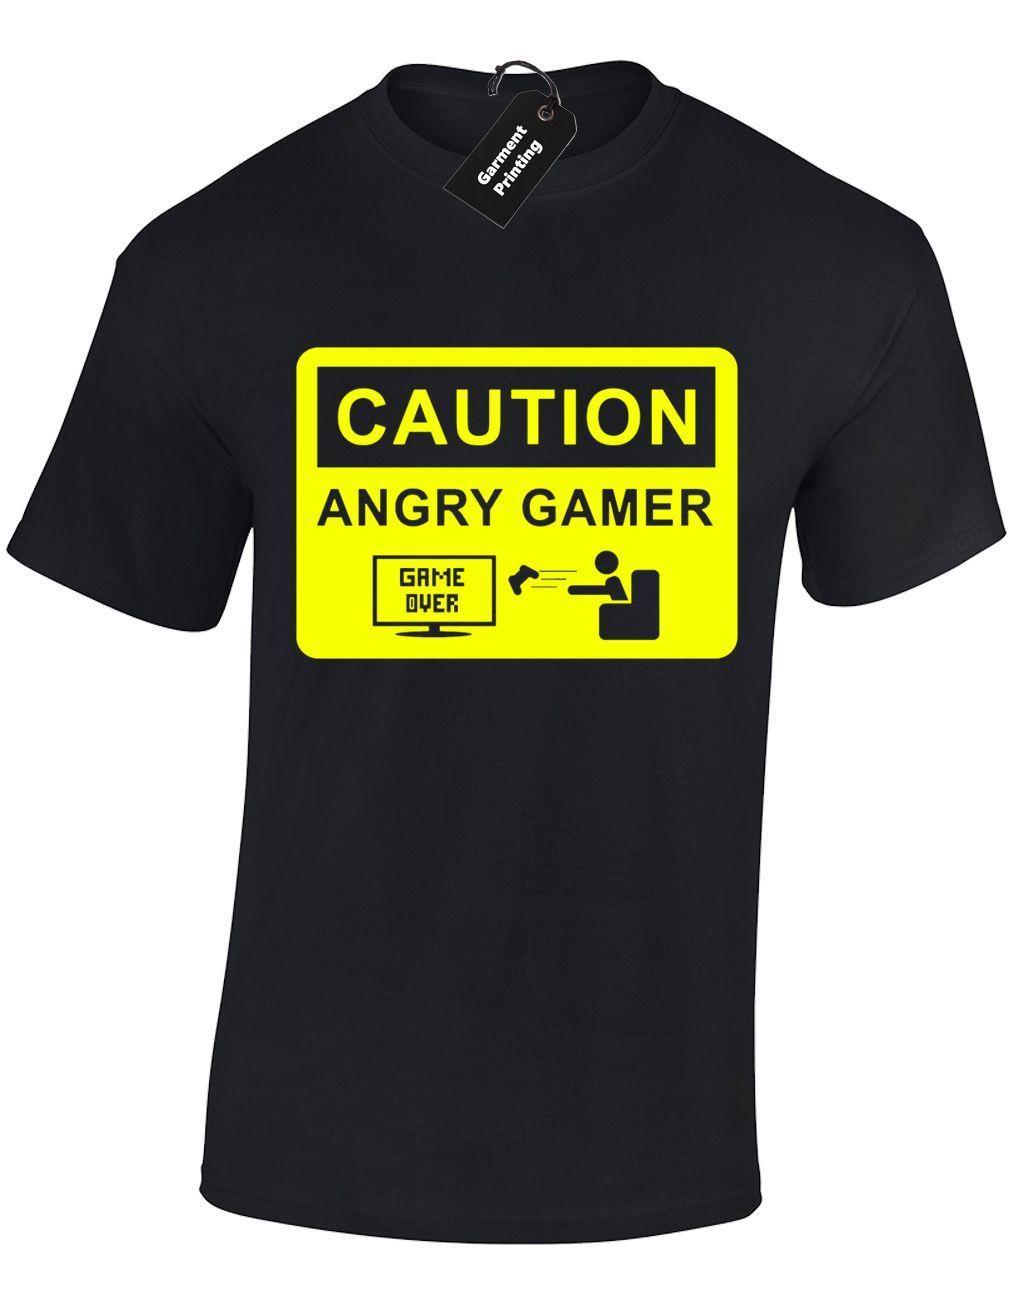 Angry Gamer Logo - CAUTION ANGRY GAMER MENS T SHIRT JOY PAD VIDEO GAME RETRO FUNNY GIFT ...